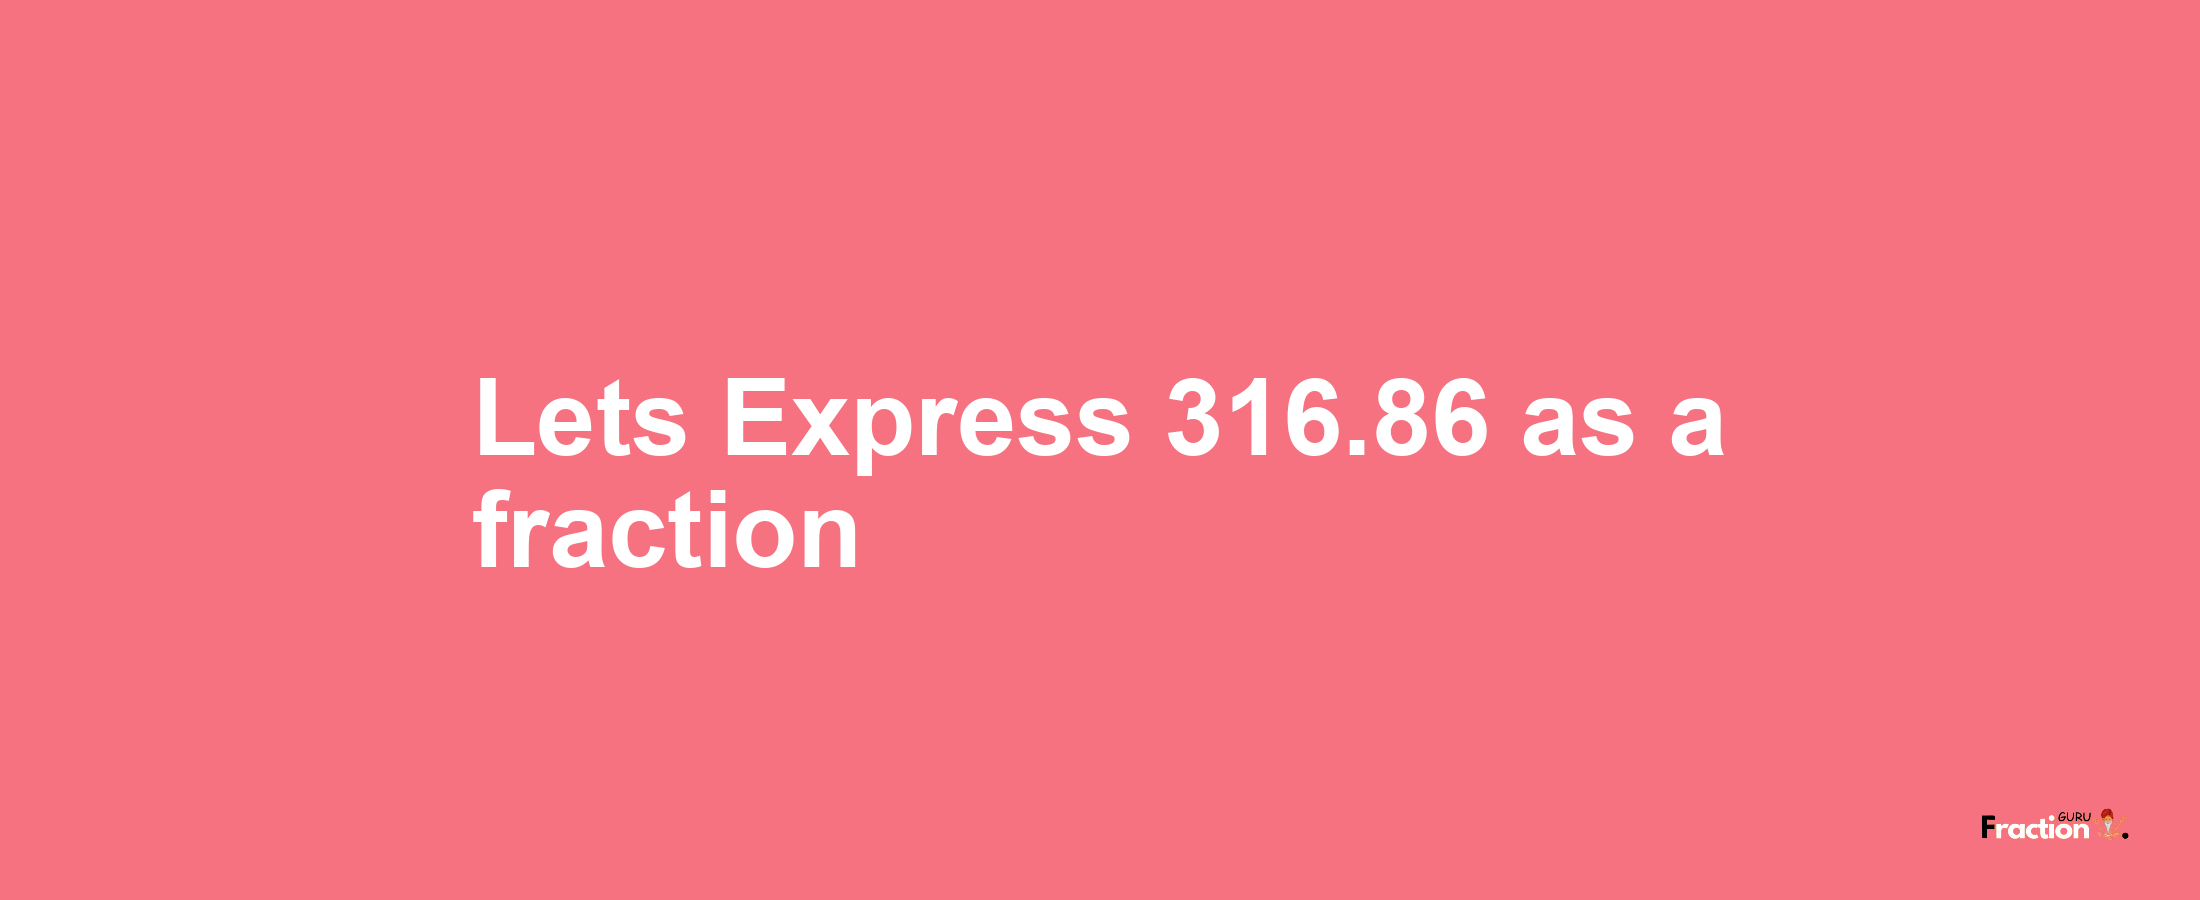 Lets Express 316.86 as afraction